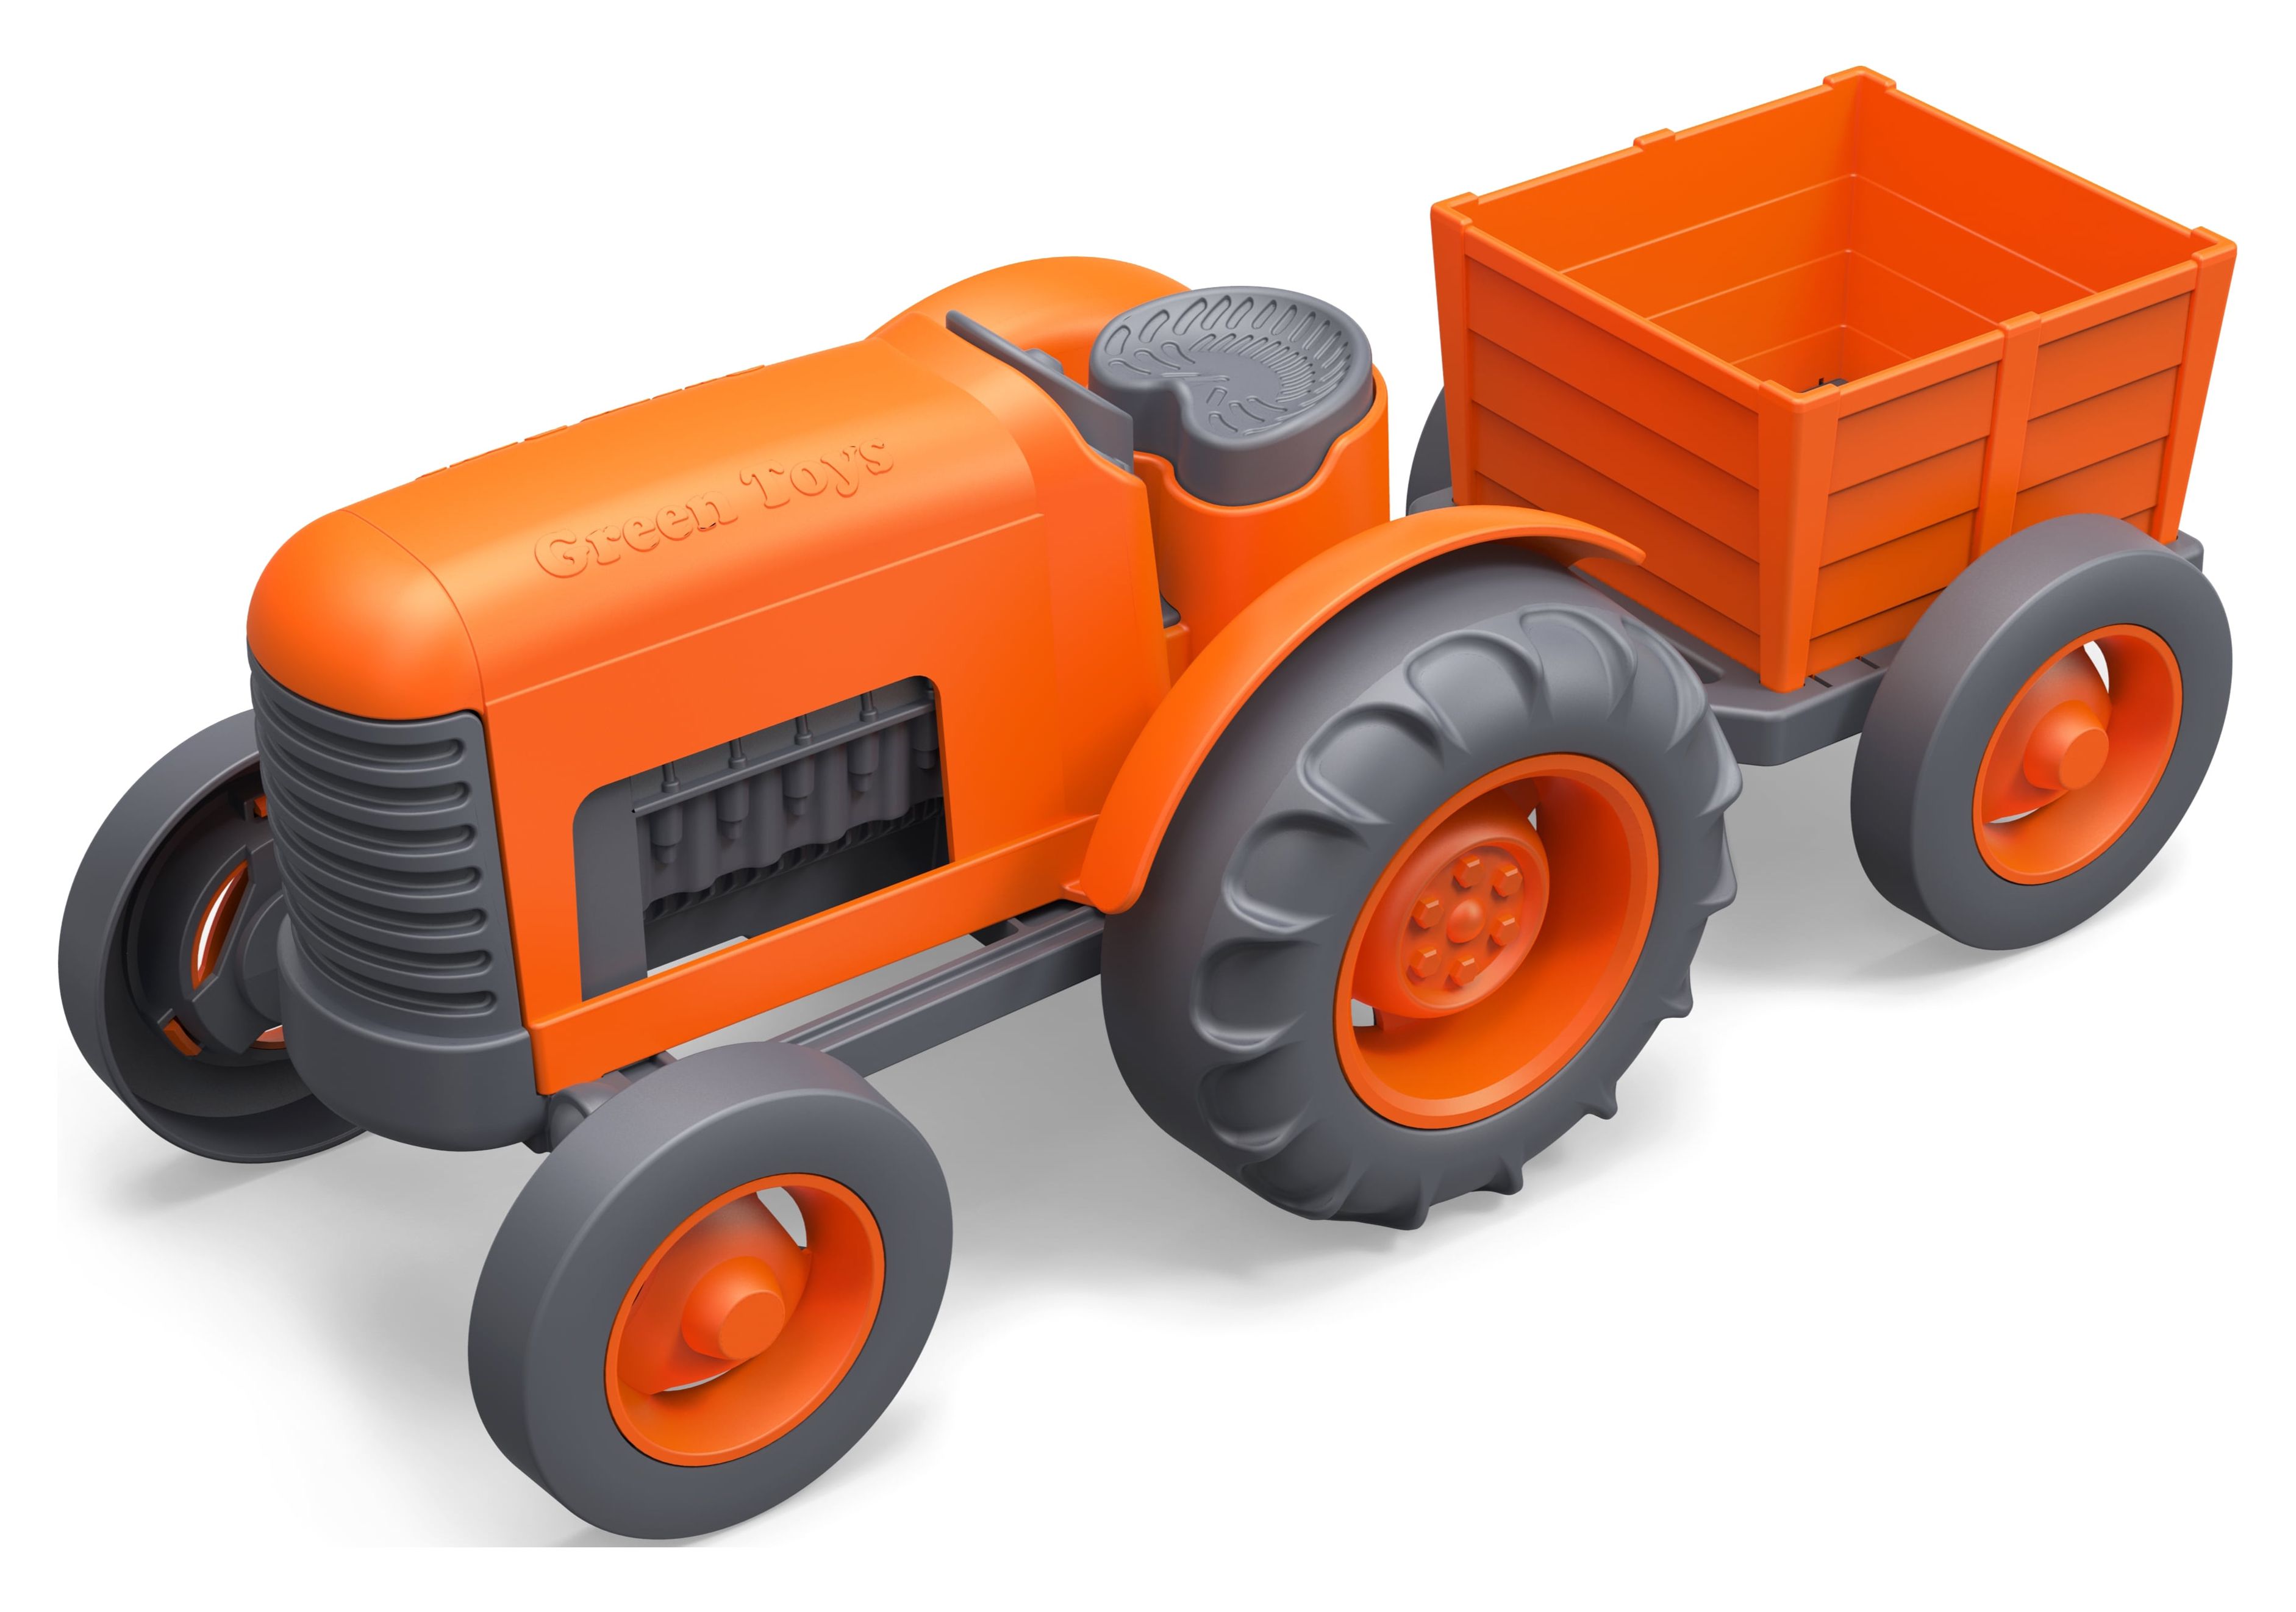 Green Toys Orange Tractor Play Vehicle, for Unisex Child Ages 1+ - image 1 of 2